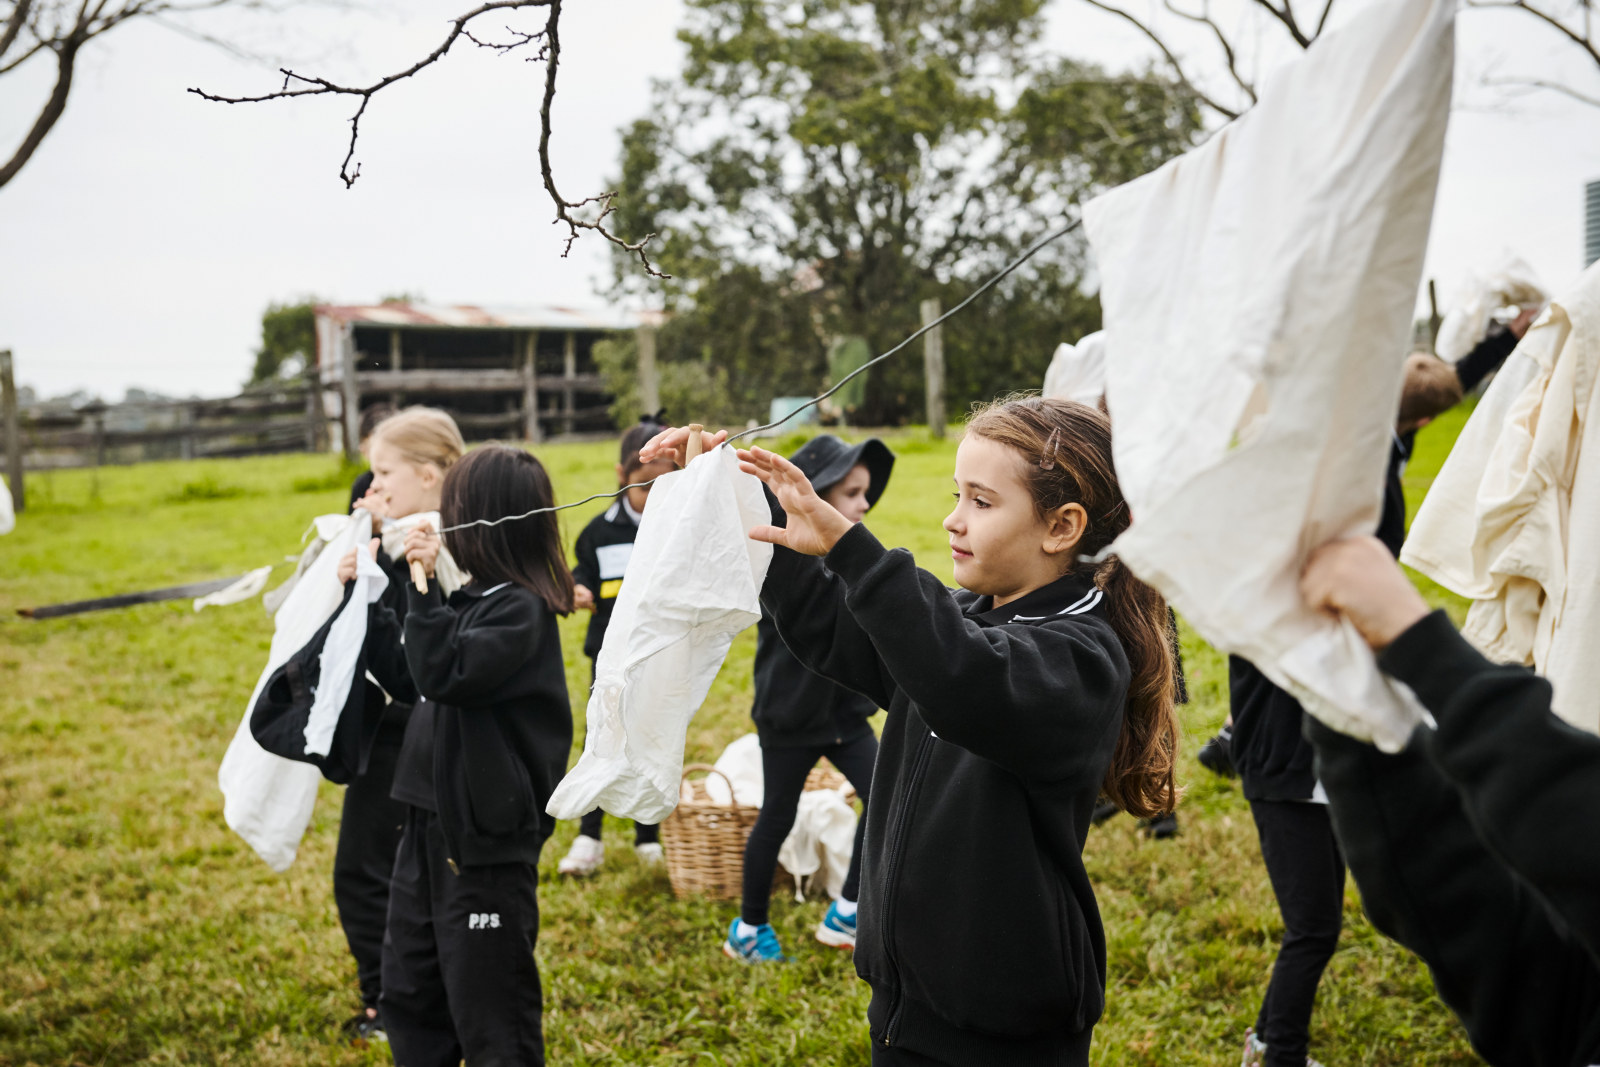 Students hanging out the washing during Early to Rise at Rouse Hill Estate